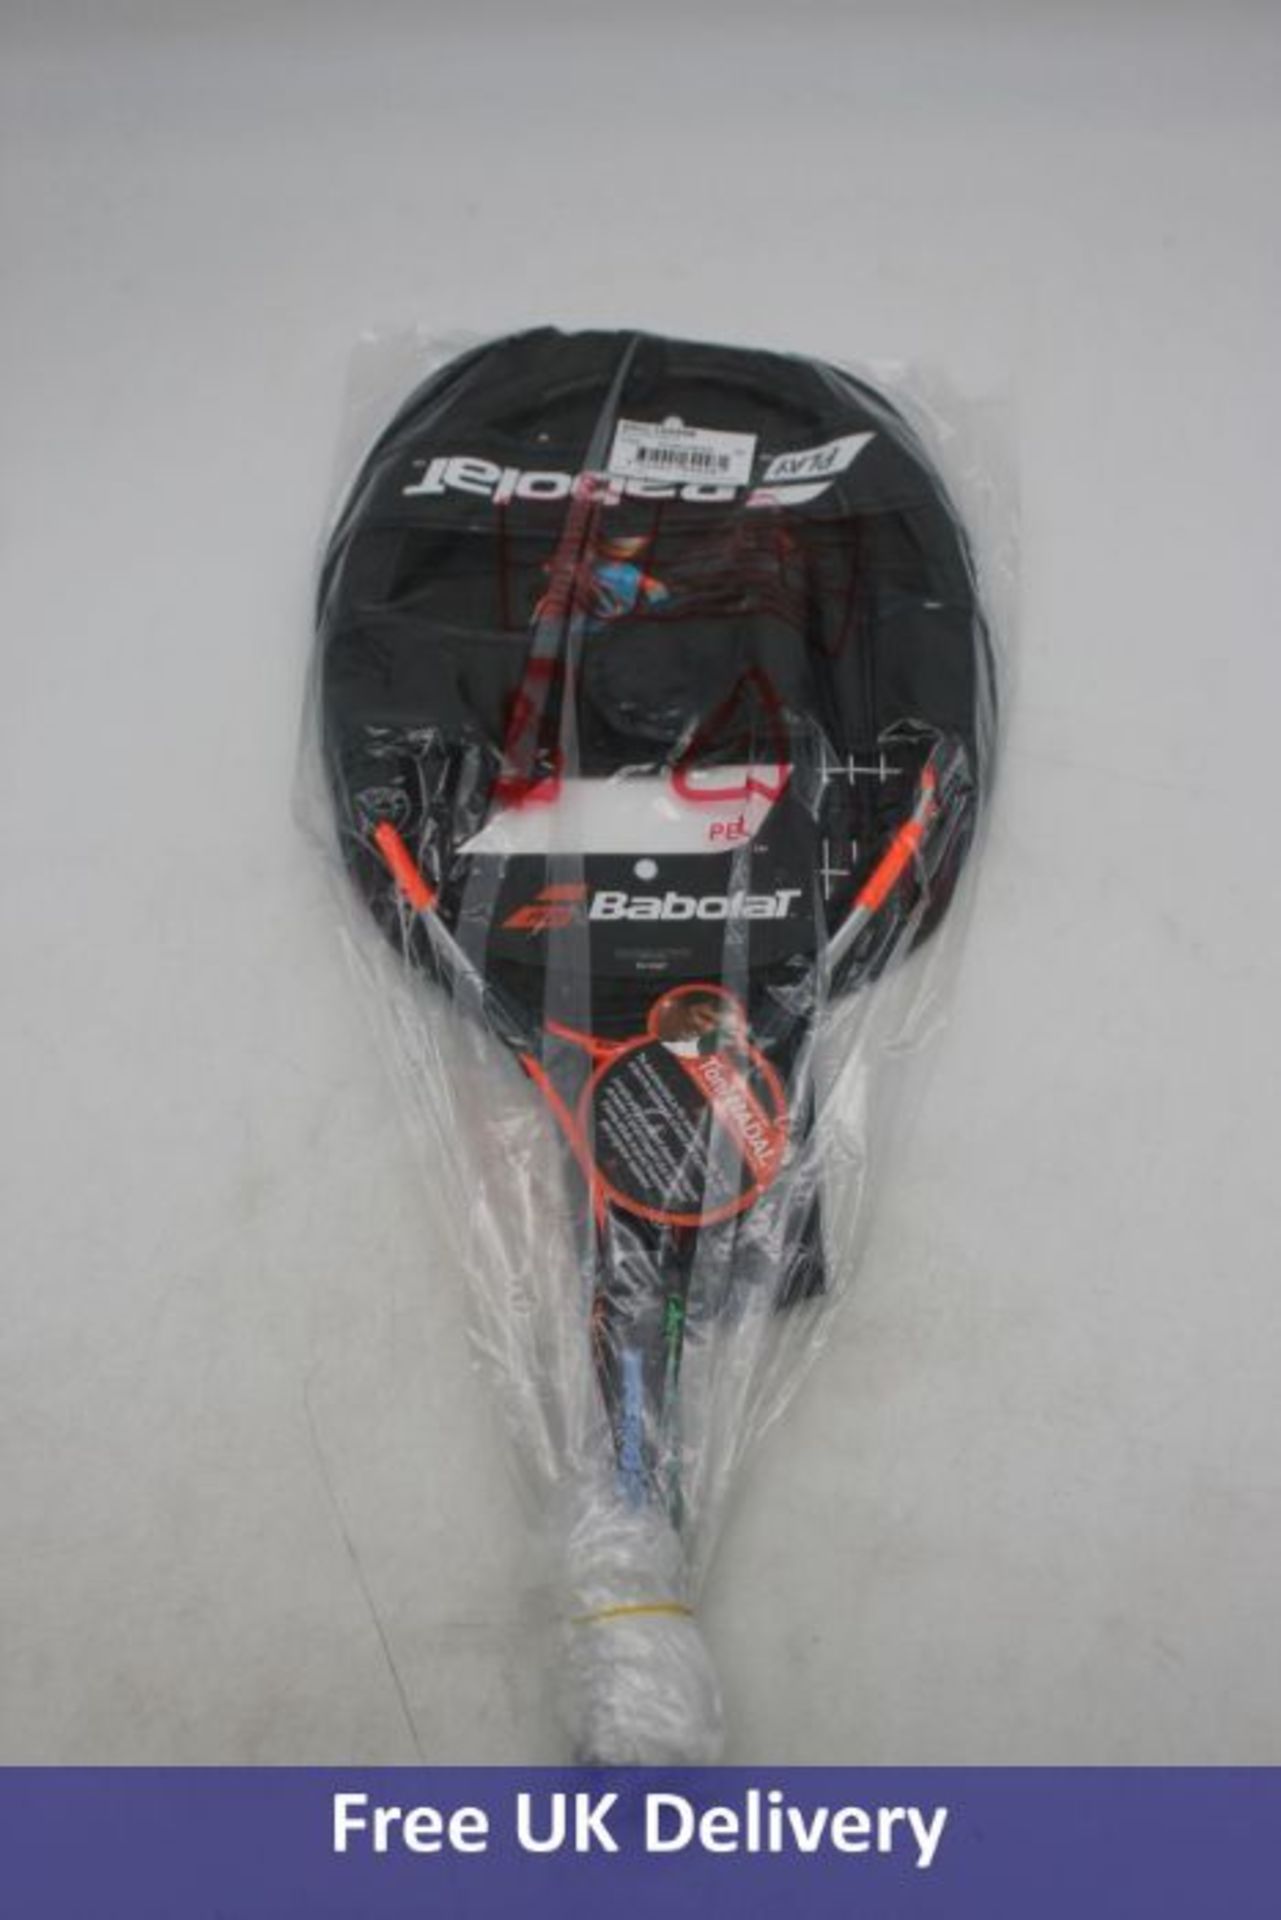 Thirteen Babolat items include 12x Ball Fighter 23 tennis Racket 60cm, Black/Orange/Grey and 1x 36 T